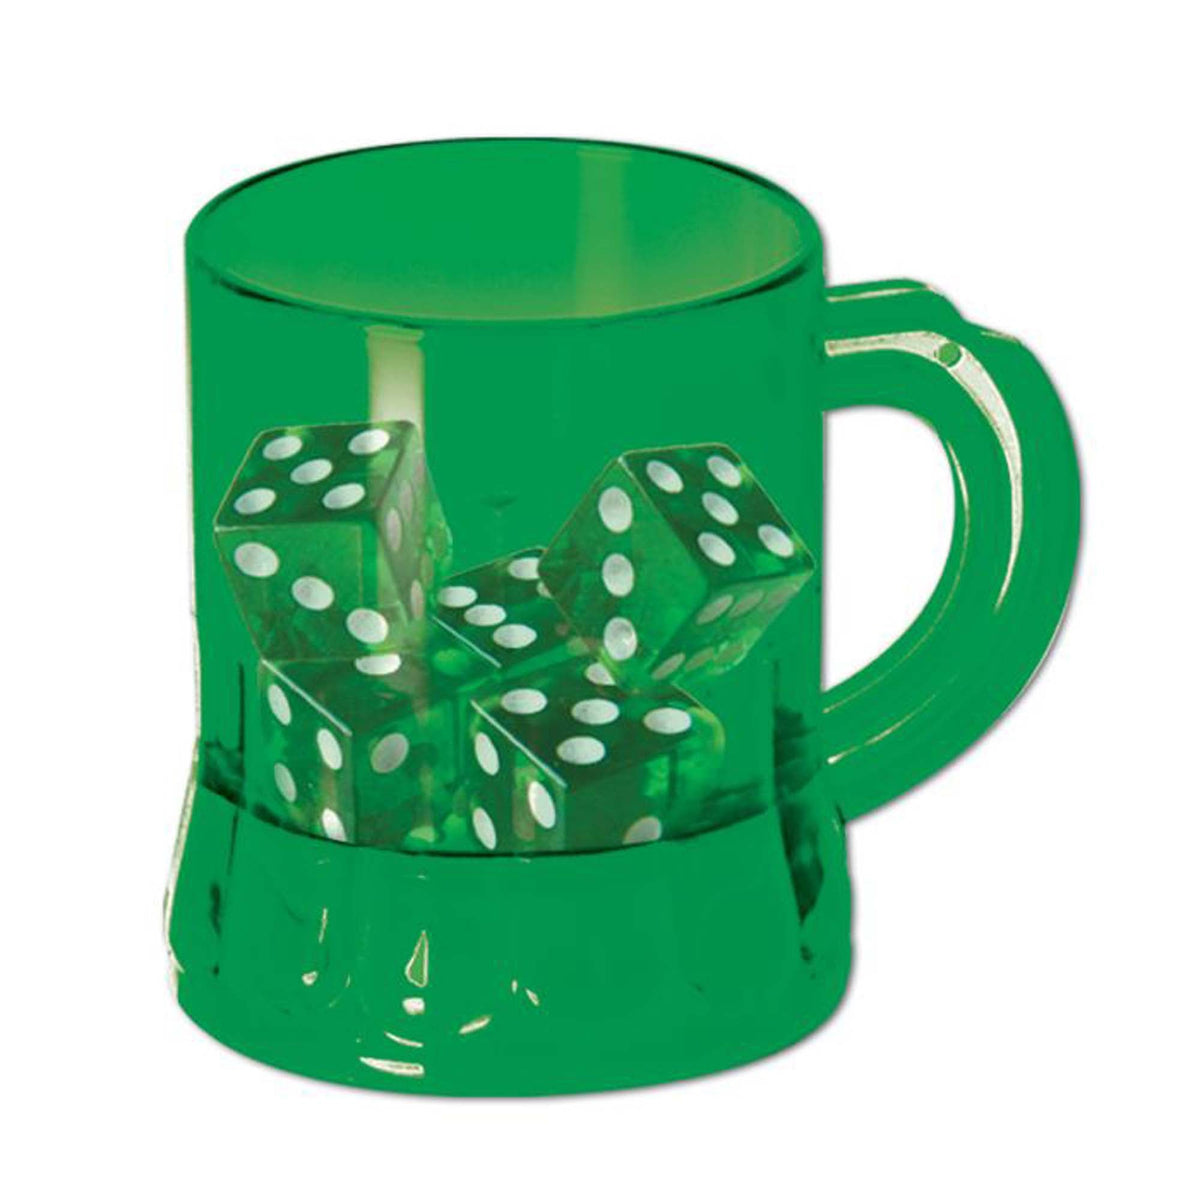 BEISTLE COMPANY St-Patrick St-Patrick's Day Green Mug Shot with Dice, 6 Count